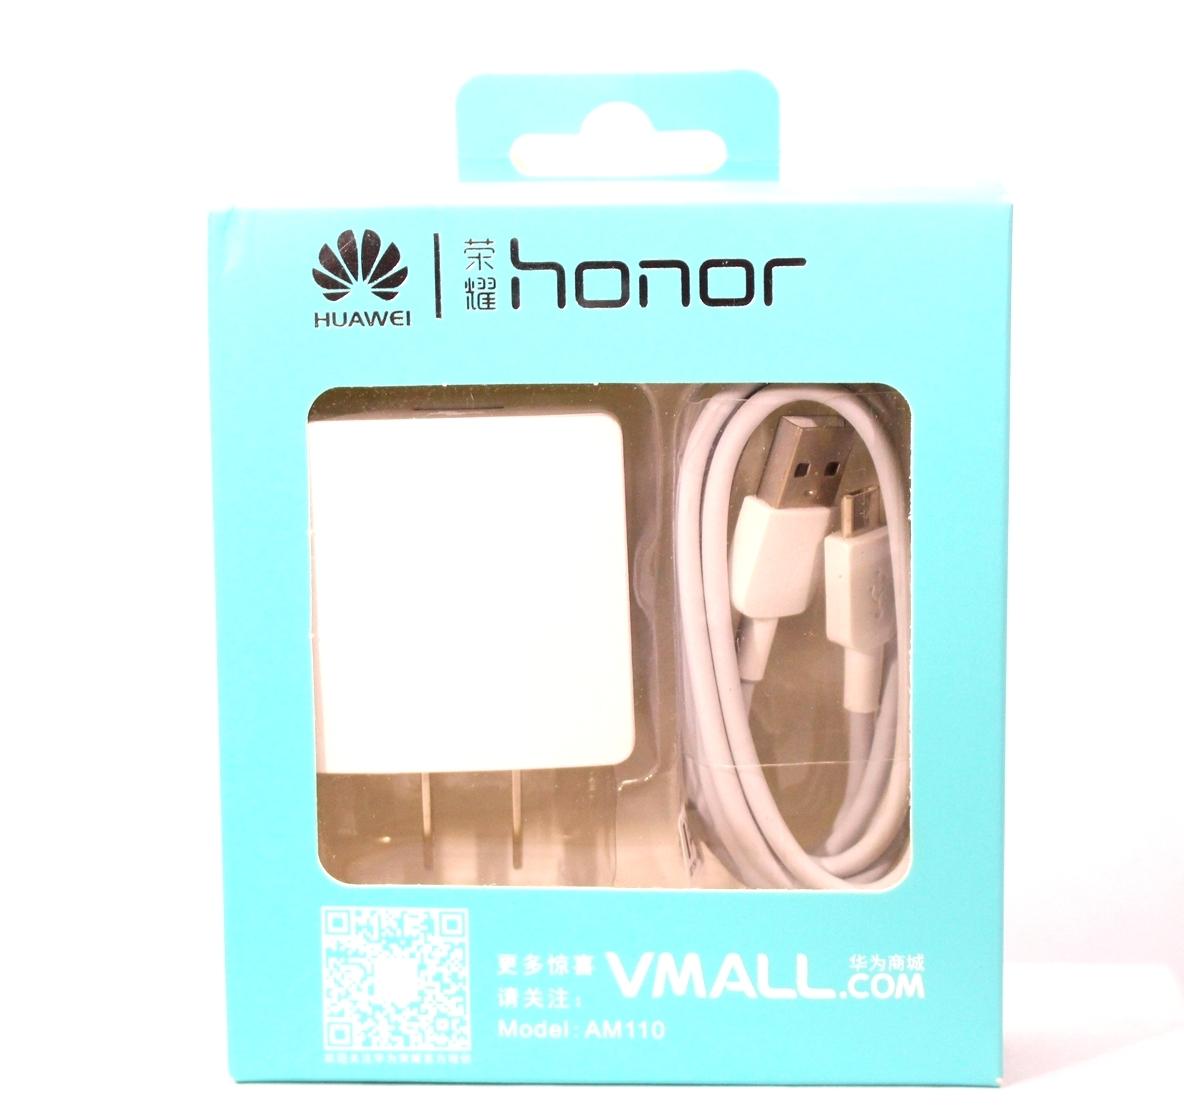 Huawei Honor AM110 Fast Charger